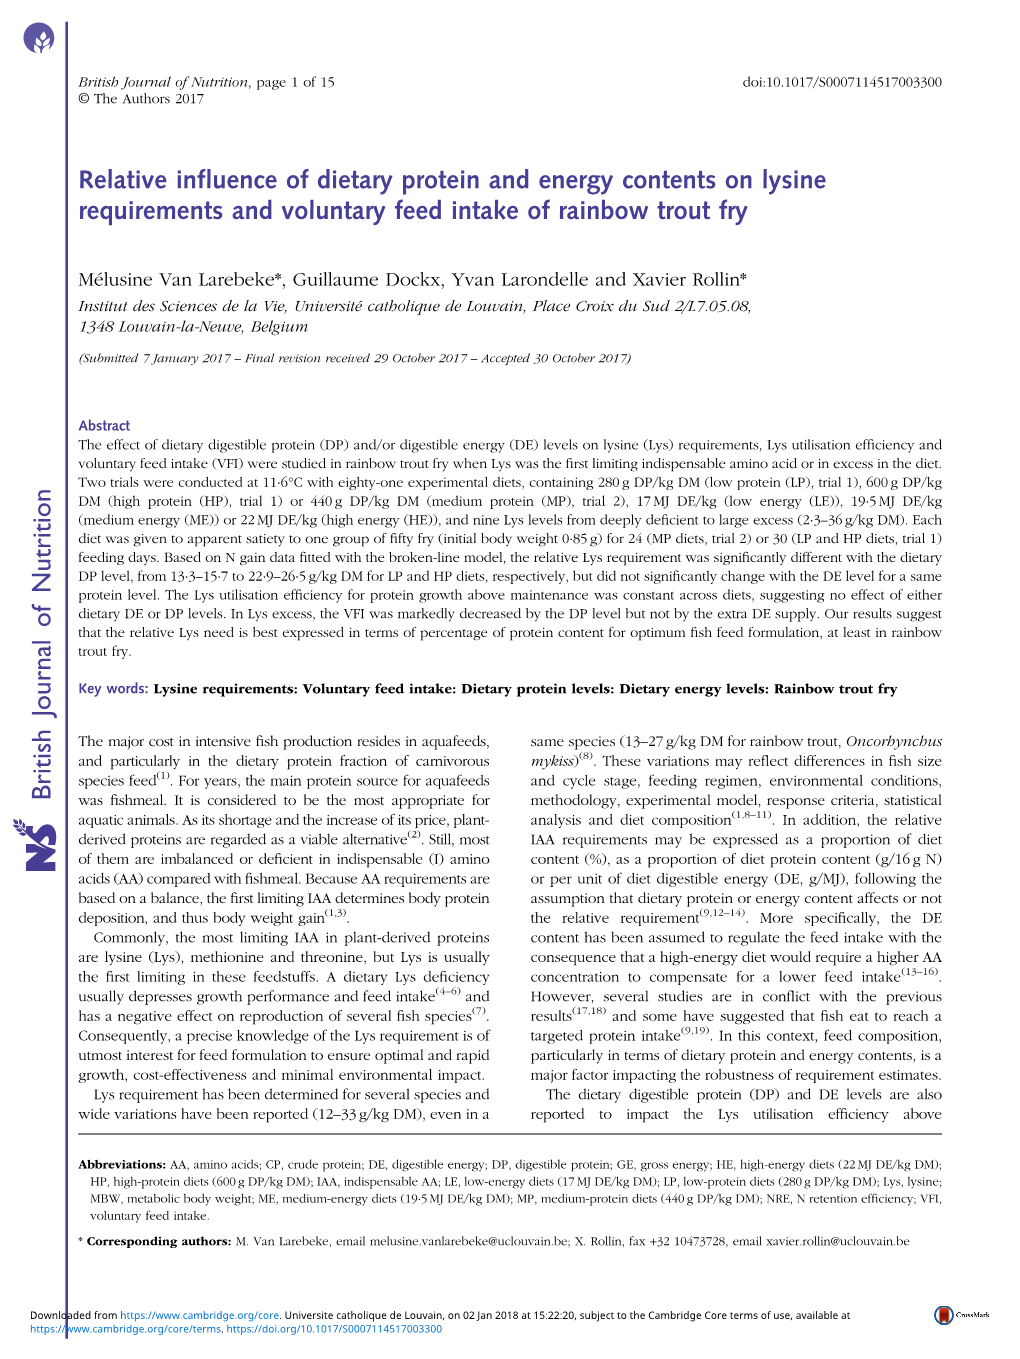 Relative Influence of Dietary Protein and Energy Contents on Lysine